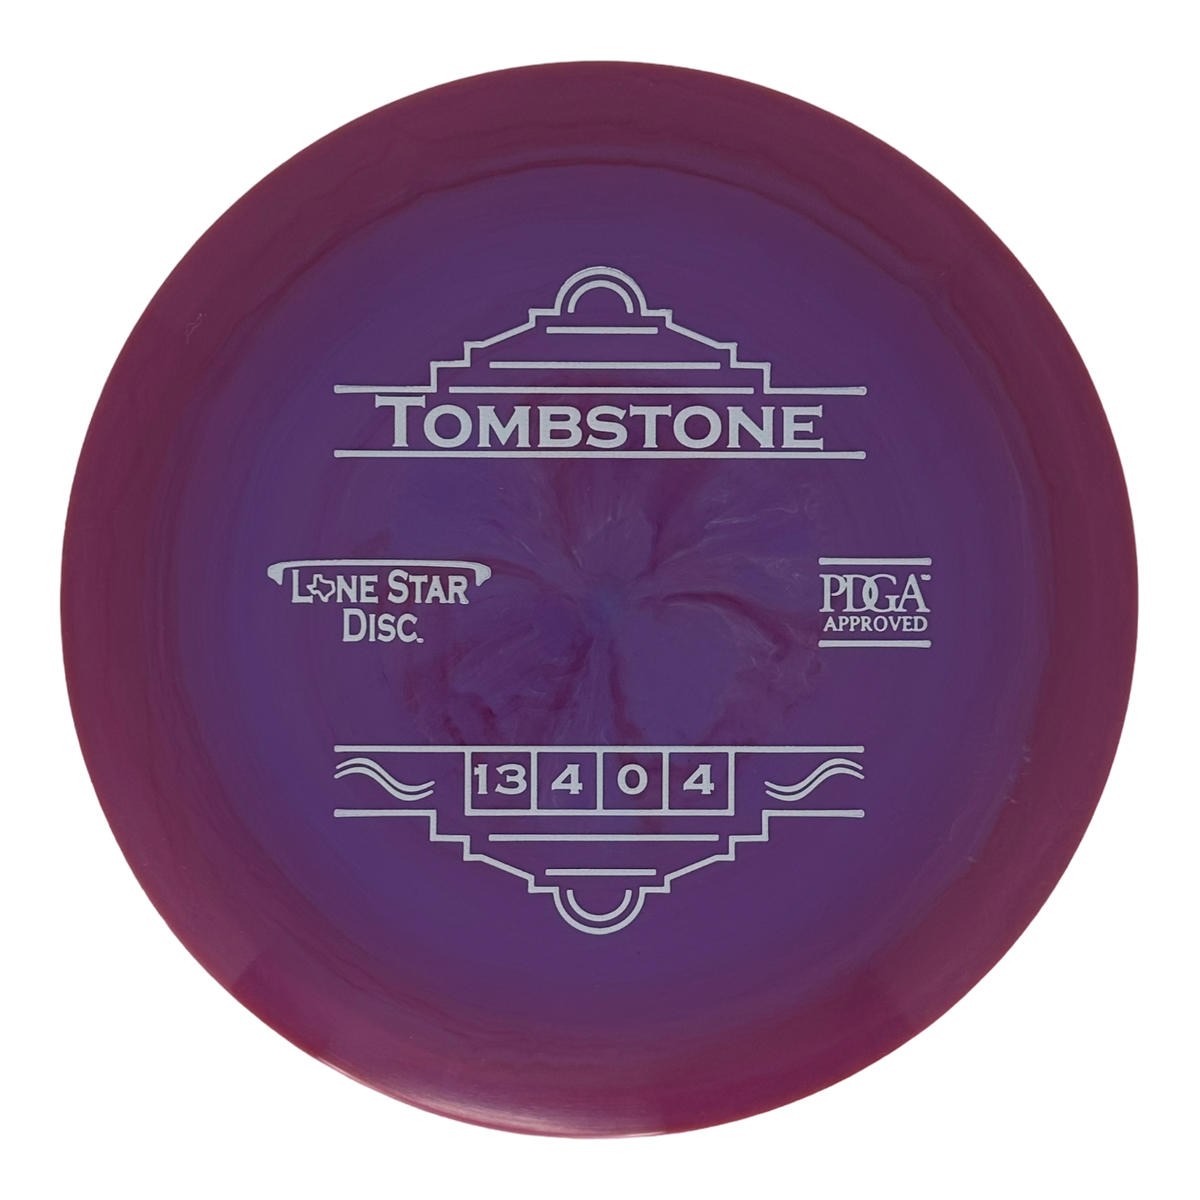 Lone Star Disc Alpha Tombstone